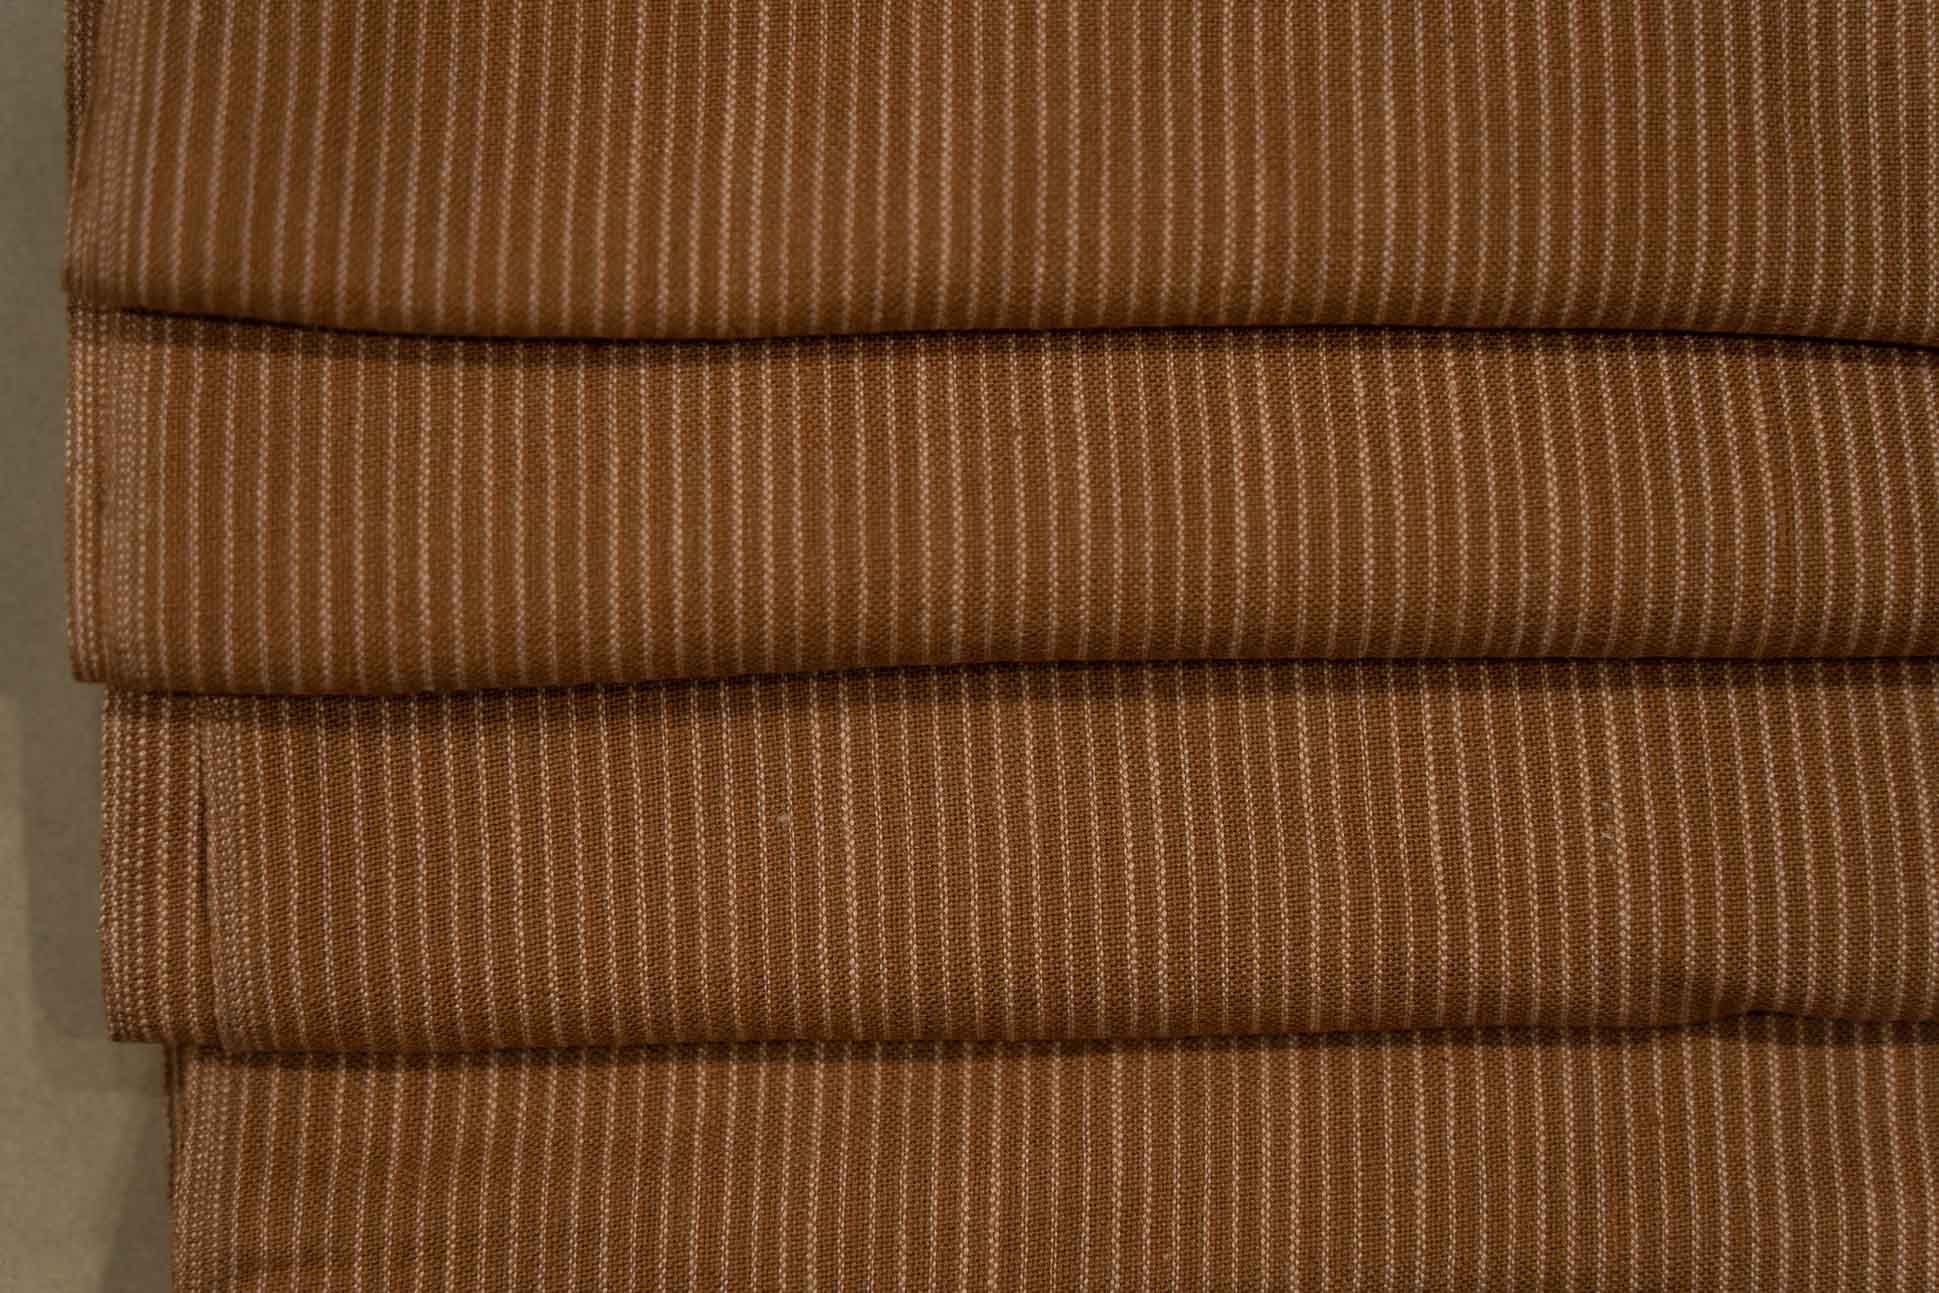 Soft Brown Handwoven Cotton Fabric